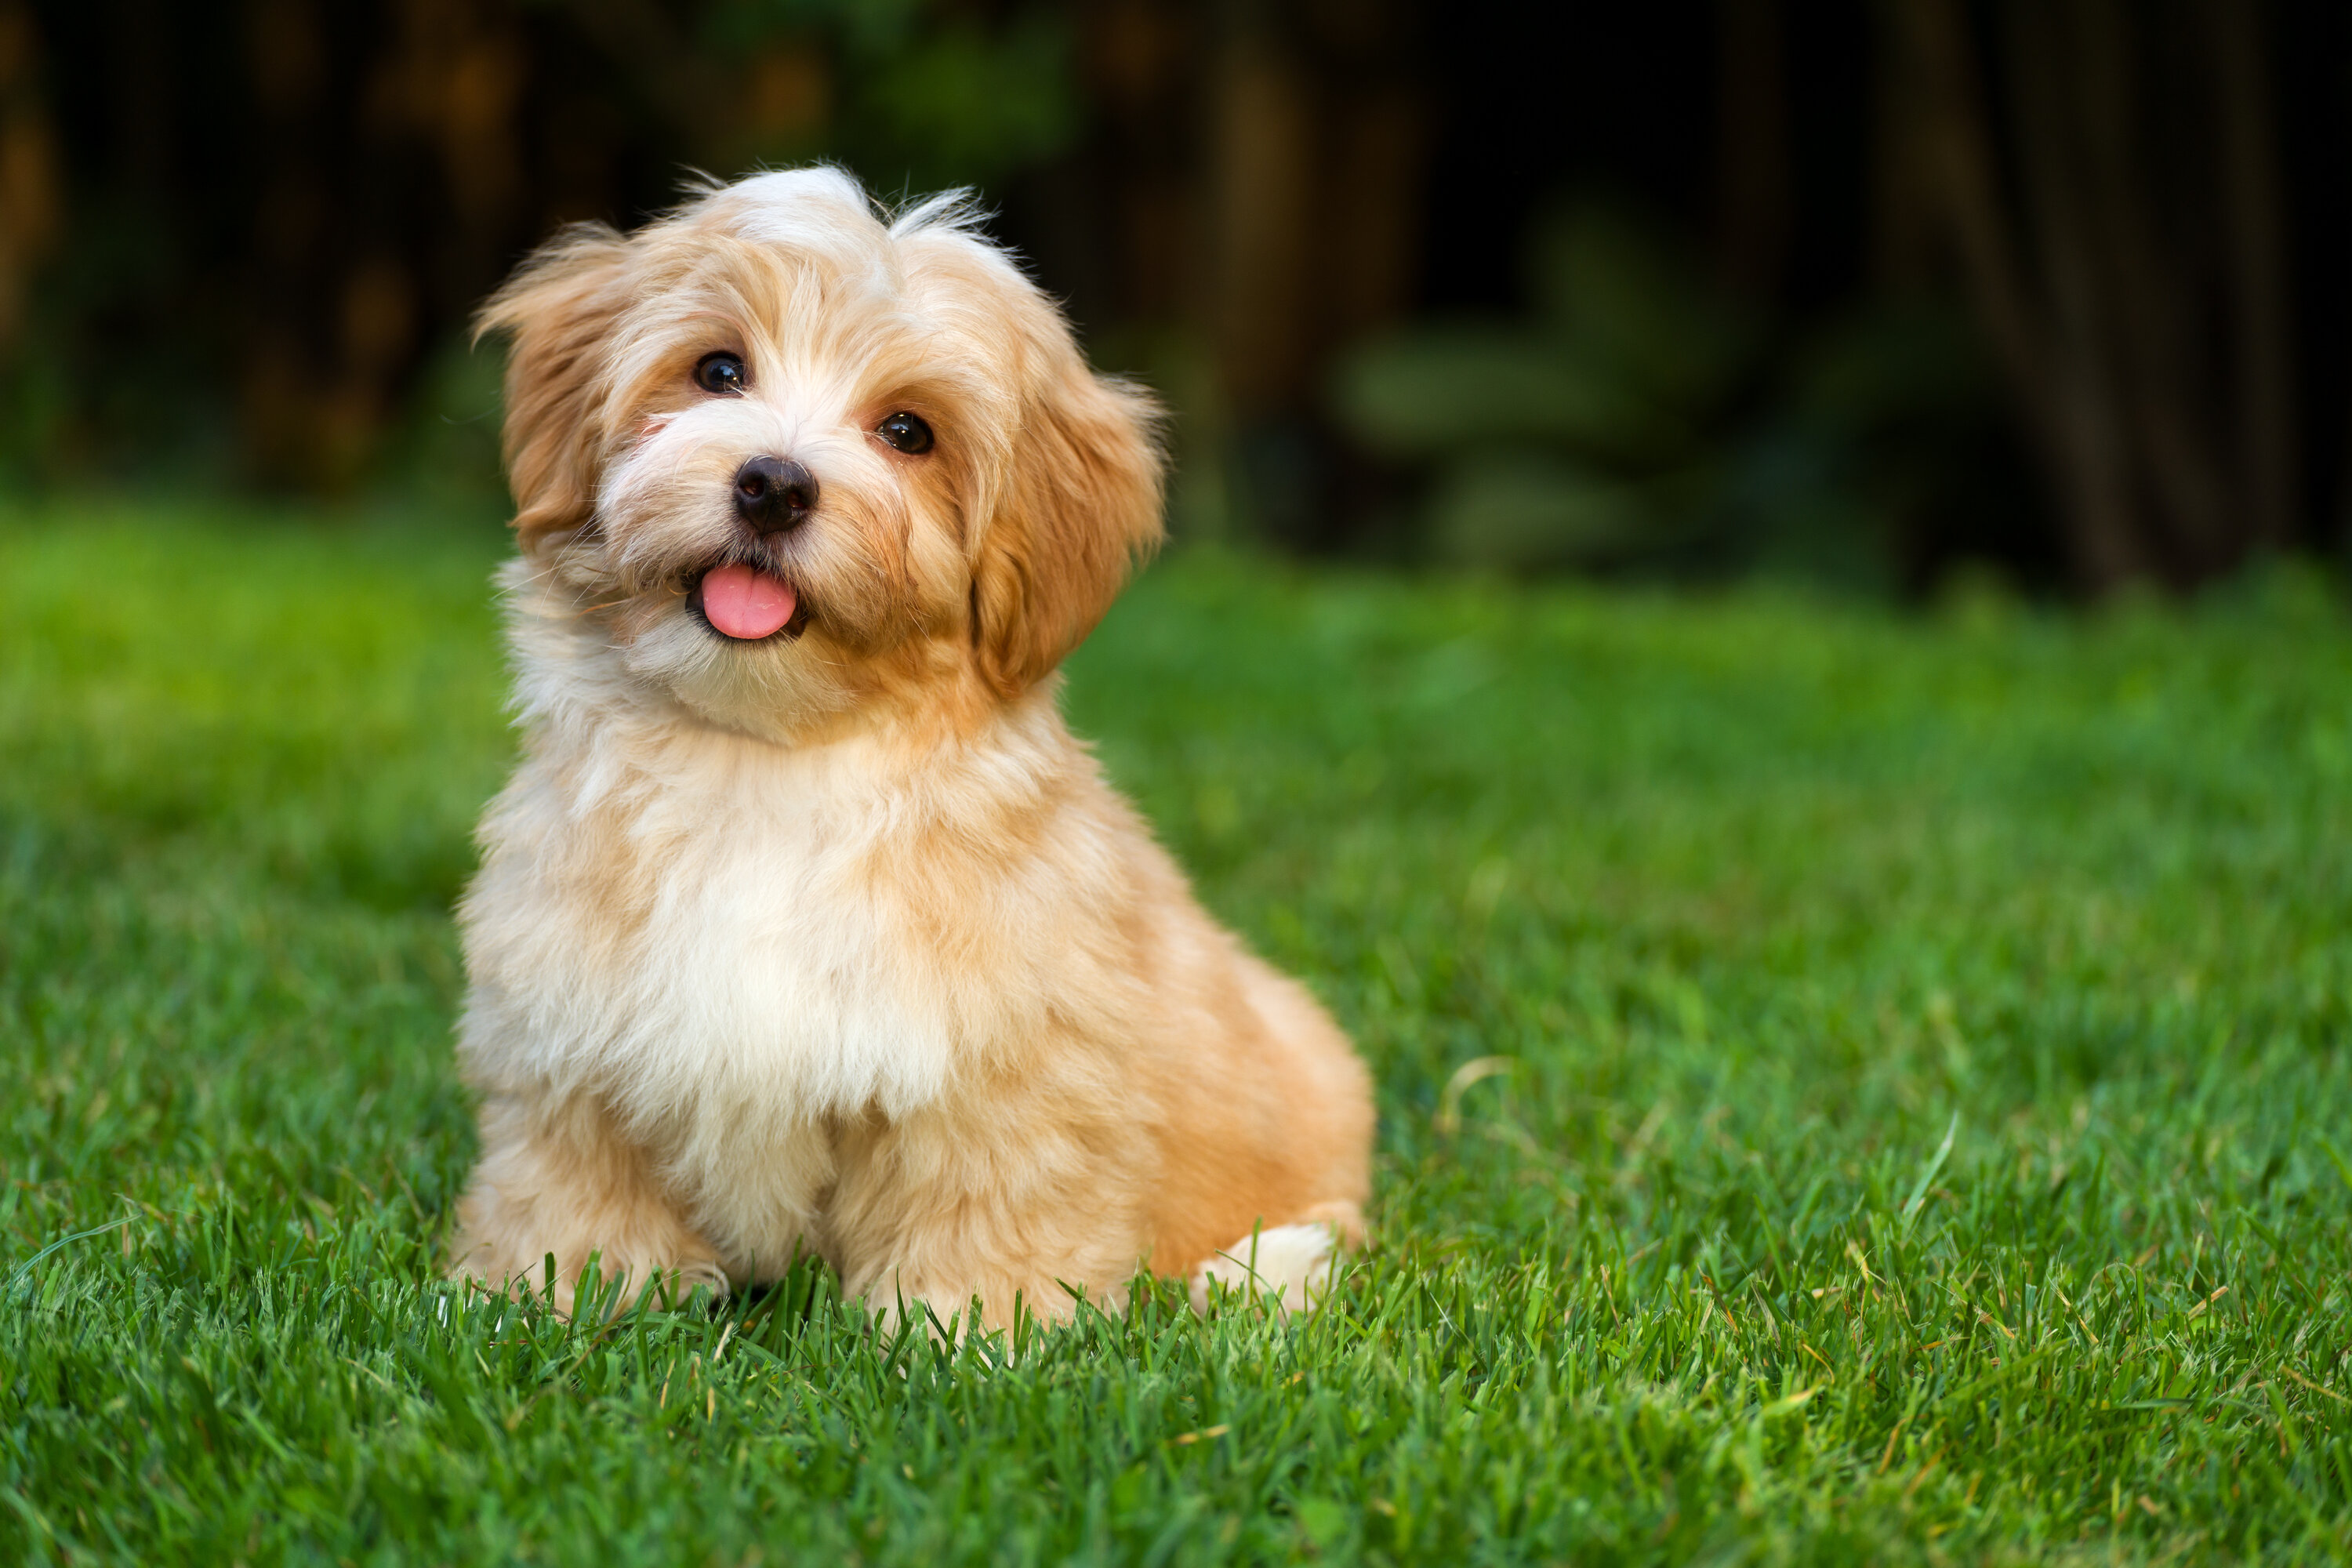 A fluffy golden and white puppy looking at the camera with its tongue out while sitting on a lush green lawn